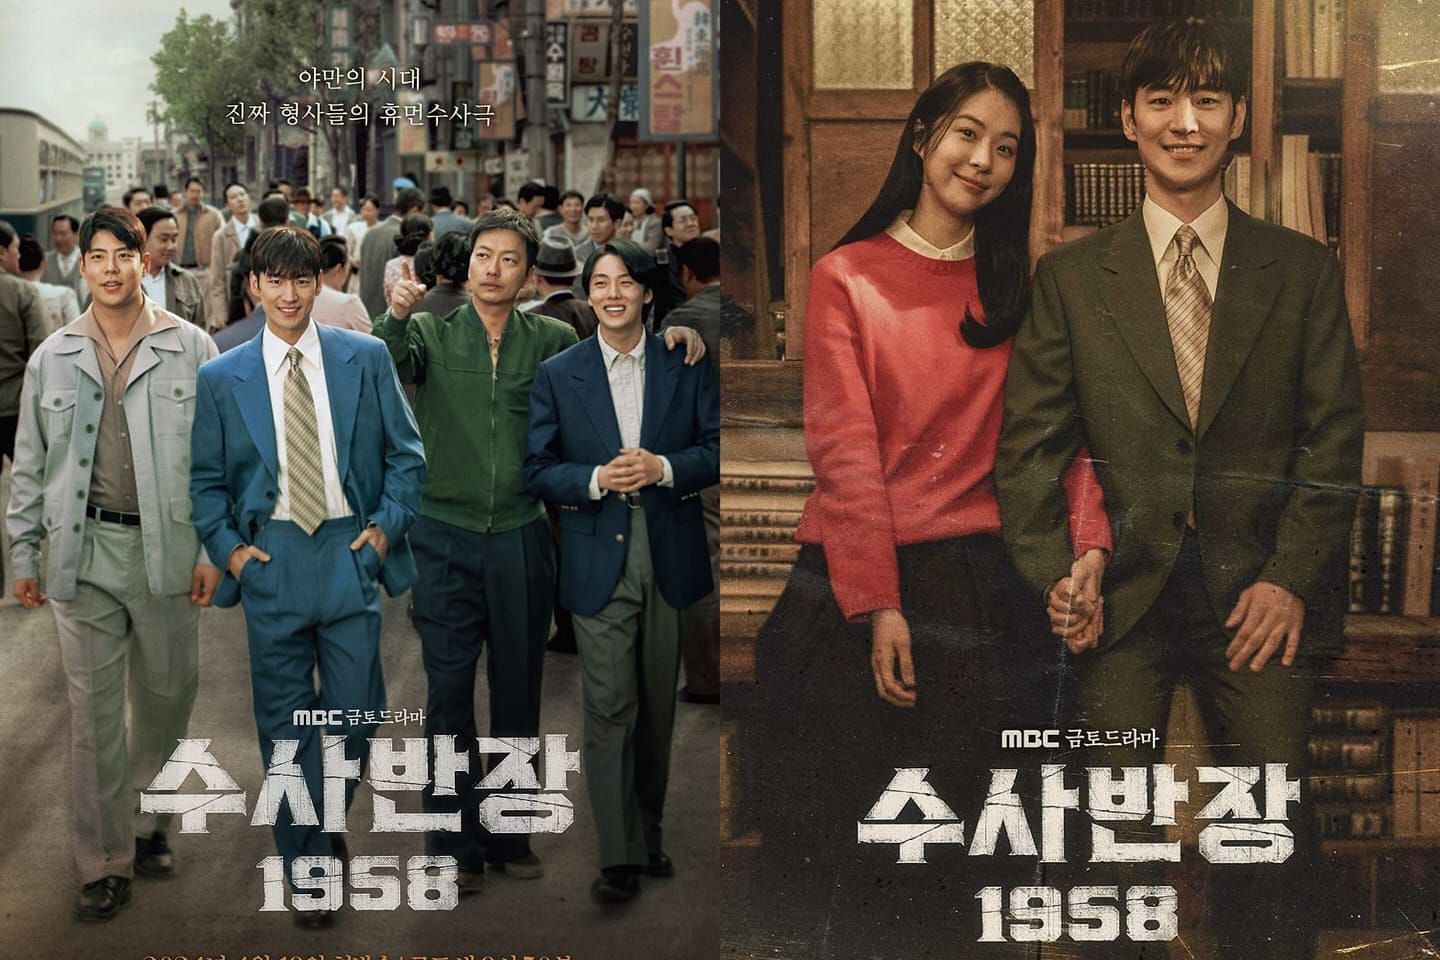 Chief Detective 1958 sets a new record for the highest premiere ratings of MBC